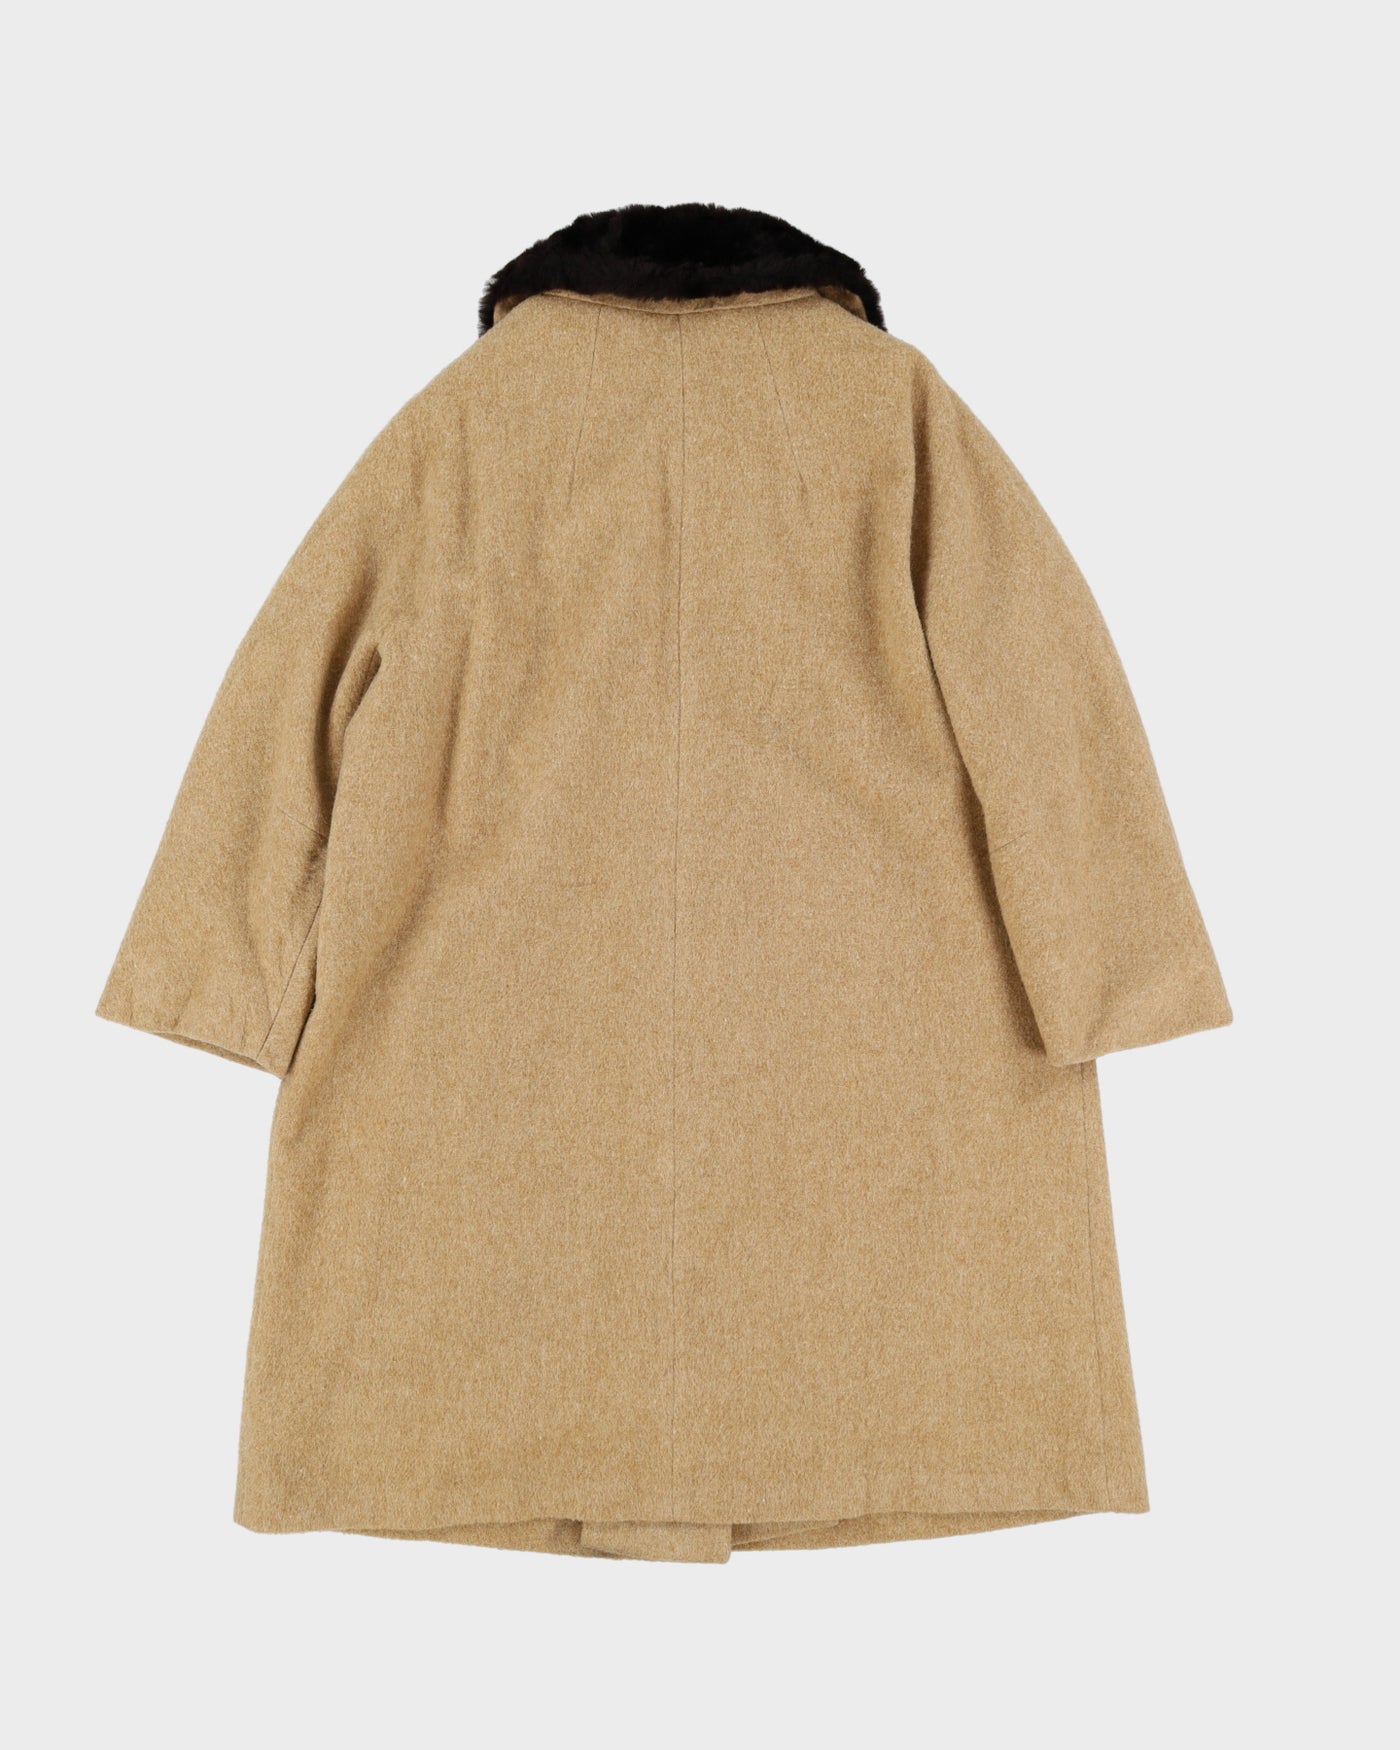 1960s Beige Wool-Blend with Faux Fur Collar Overcoat - L